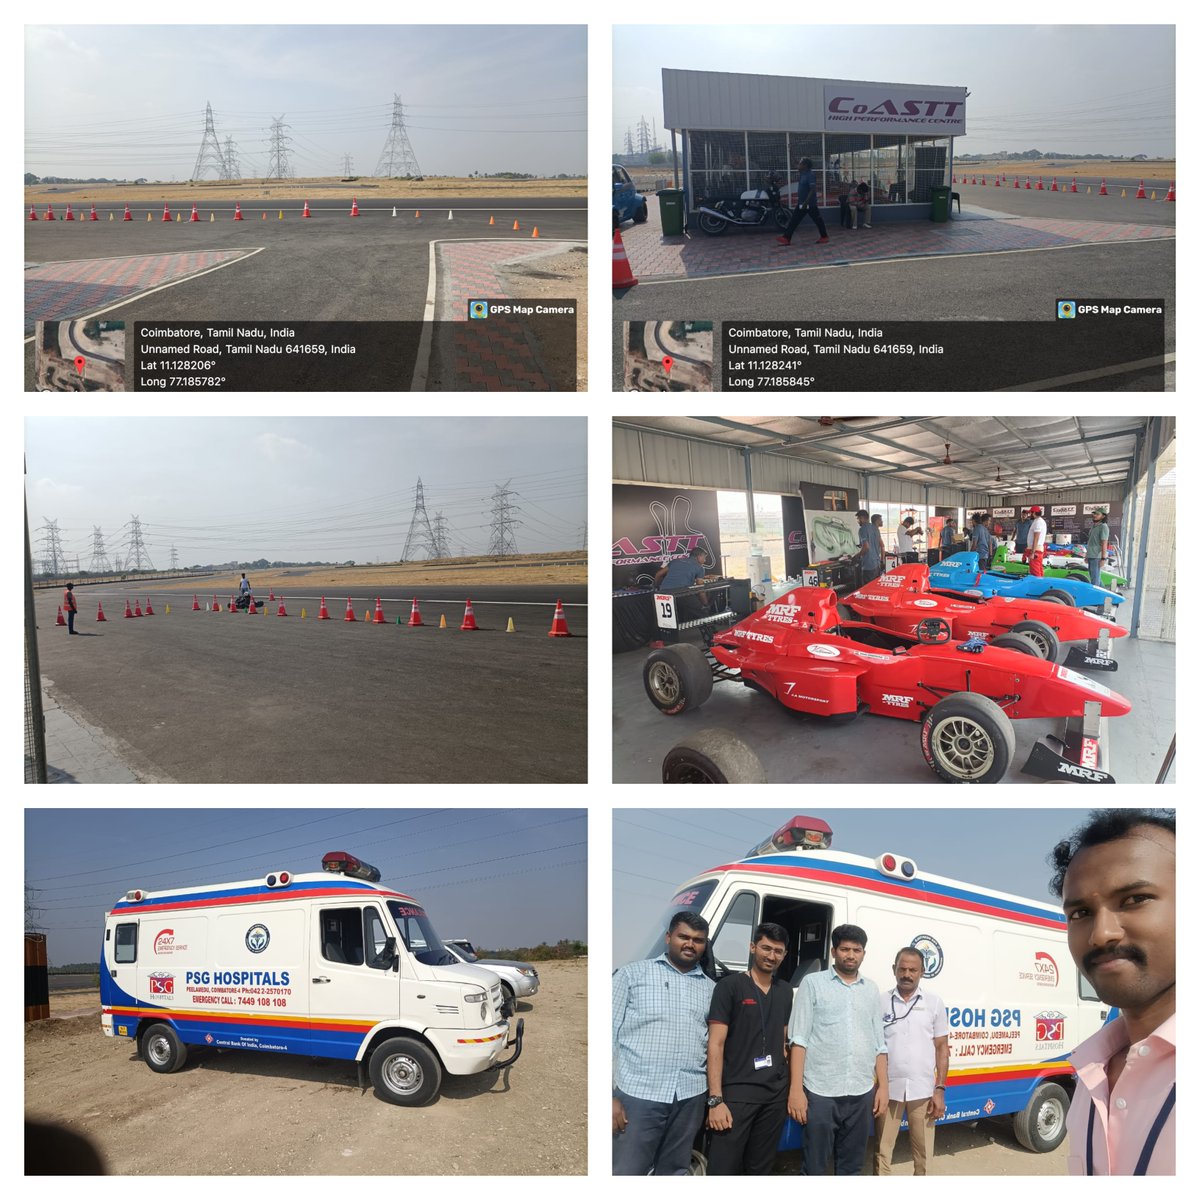 Every Second Counts. Make A Difference.First aid support by PSG Hospitals @ Coastt high performance center (Car Race) Karumathampatti #PSG #PSGHospitals #psgimsr #psgsuperspeciality #firstaid #firstaidkit #ambulance #firstaid #cpr #firstaidkit #safety #Emergency